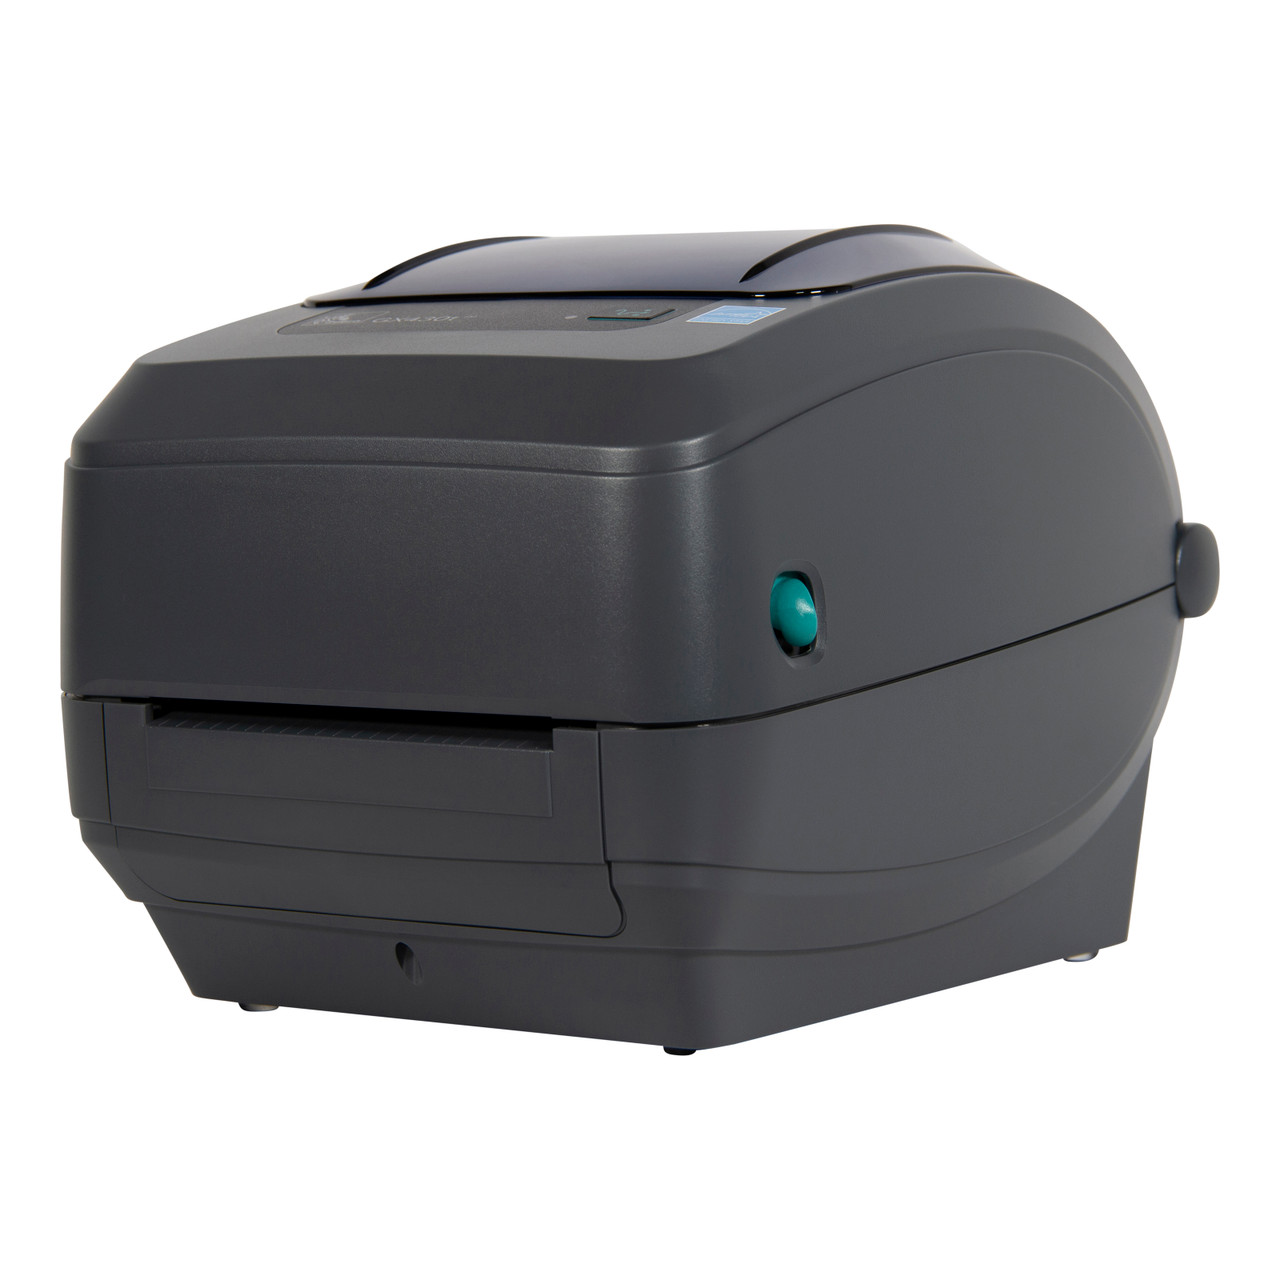 Zebra GX430t Thermal Transfer Desktop Printer for labels, Receipts, Barcodes, Tags, and Wrist Bands Print Width of in USB, Serial, and Paralle - 3